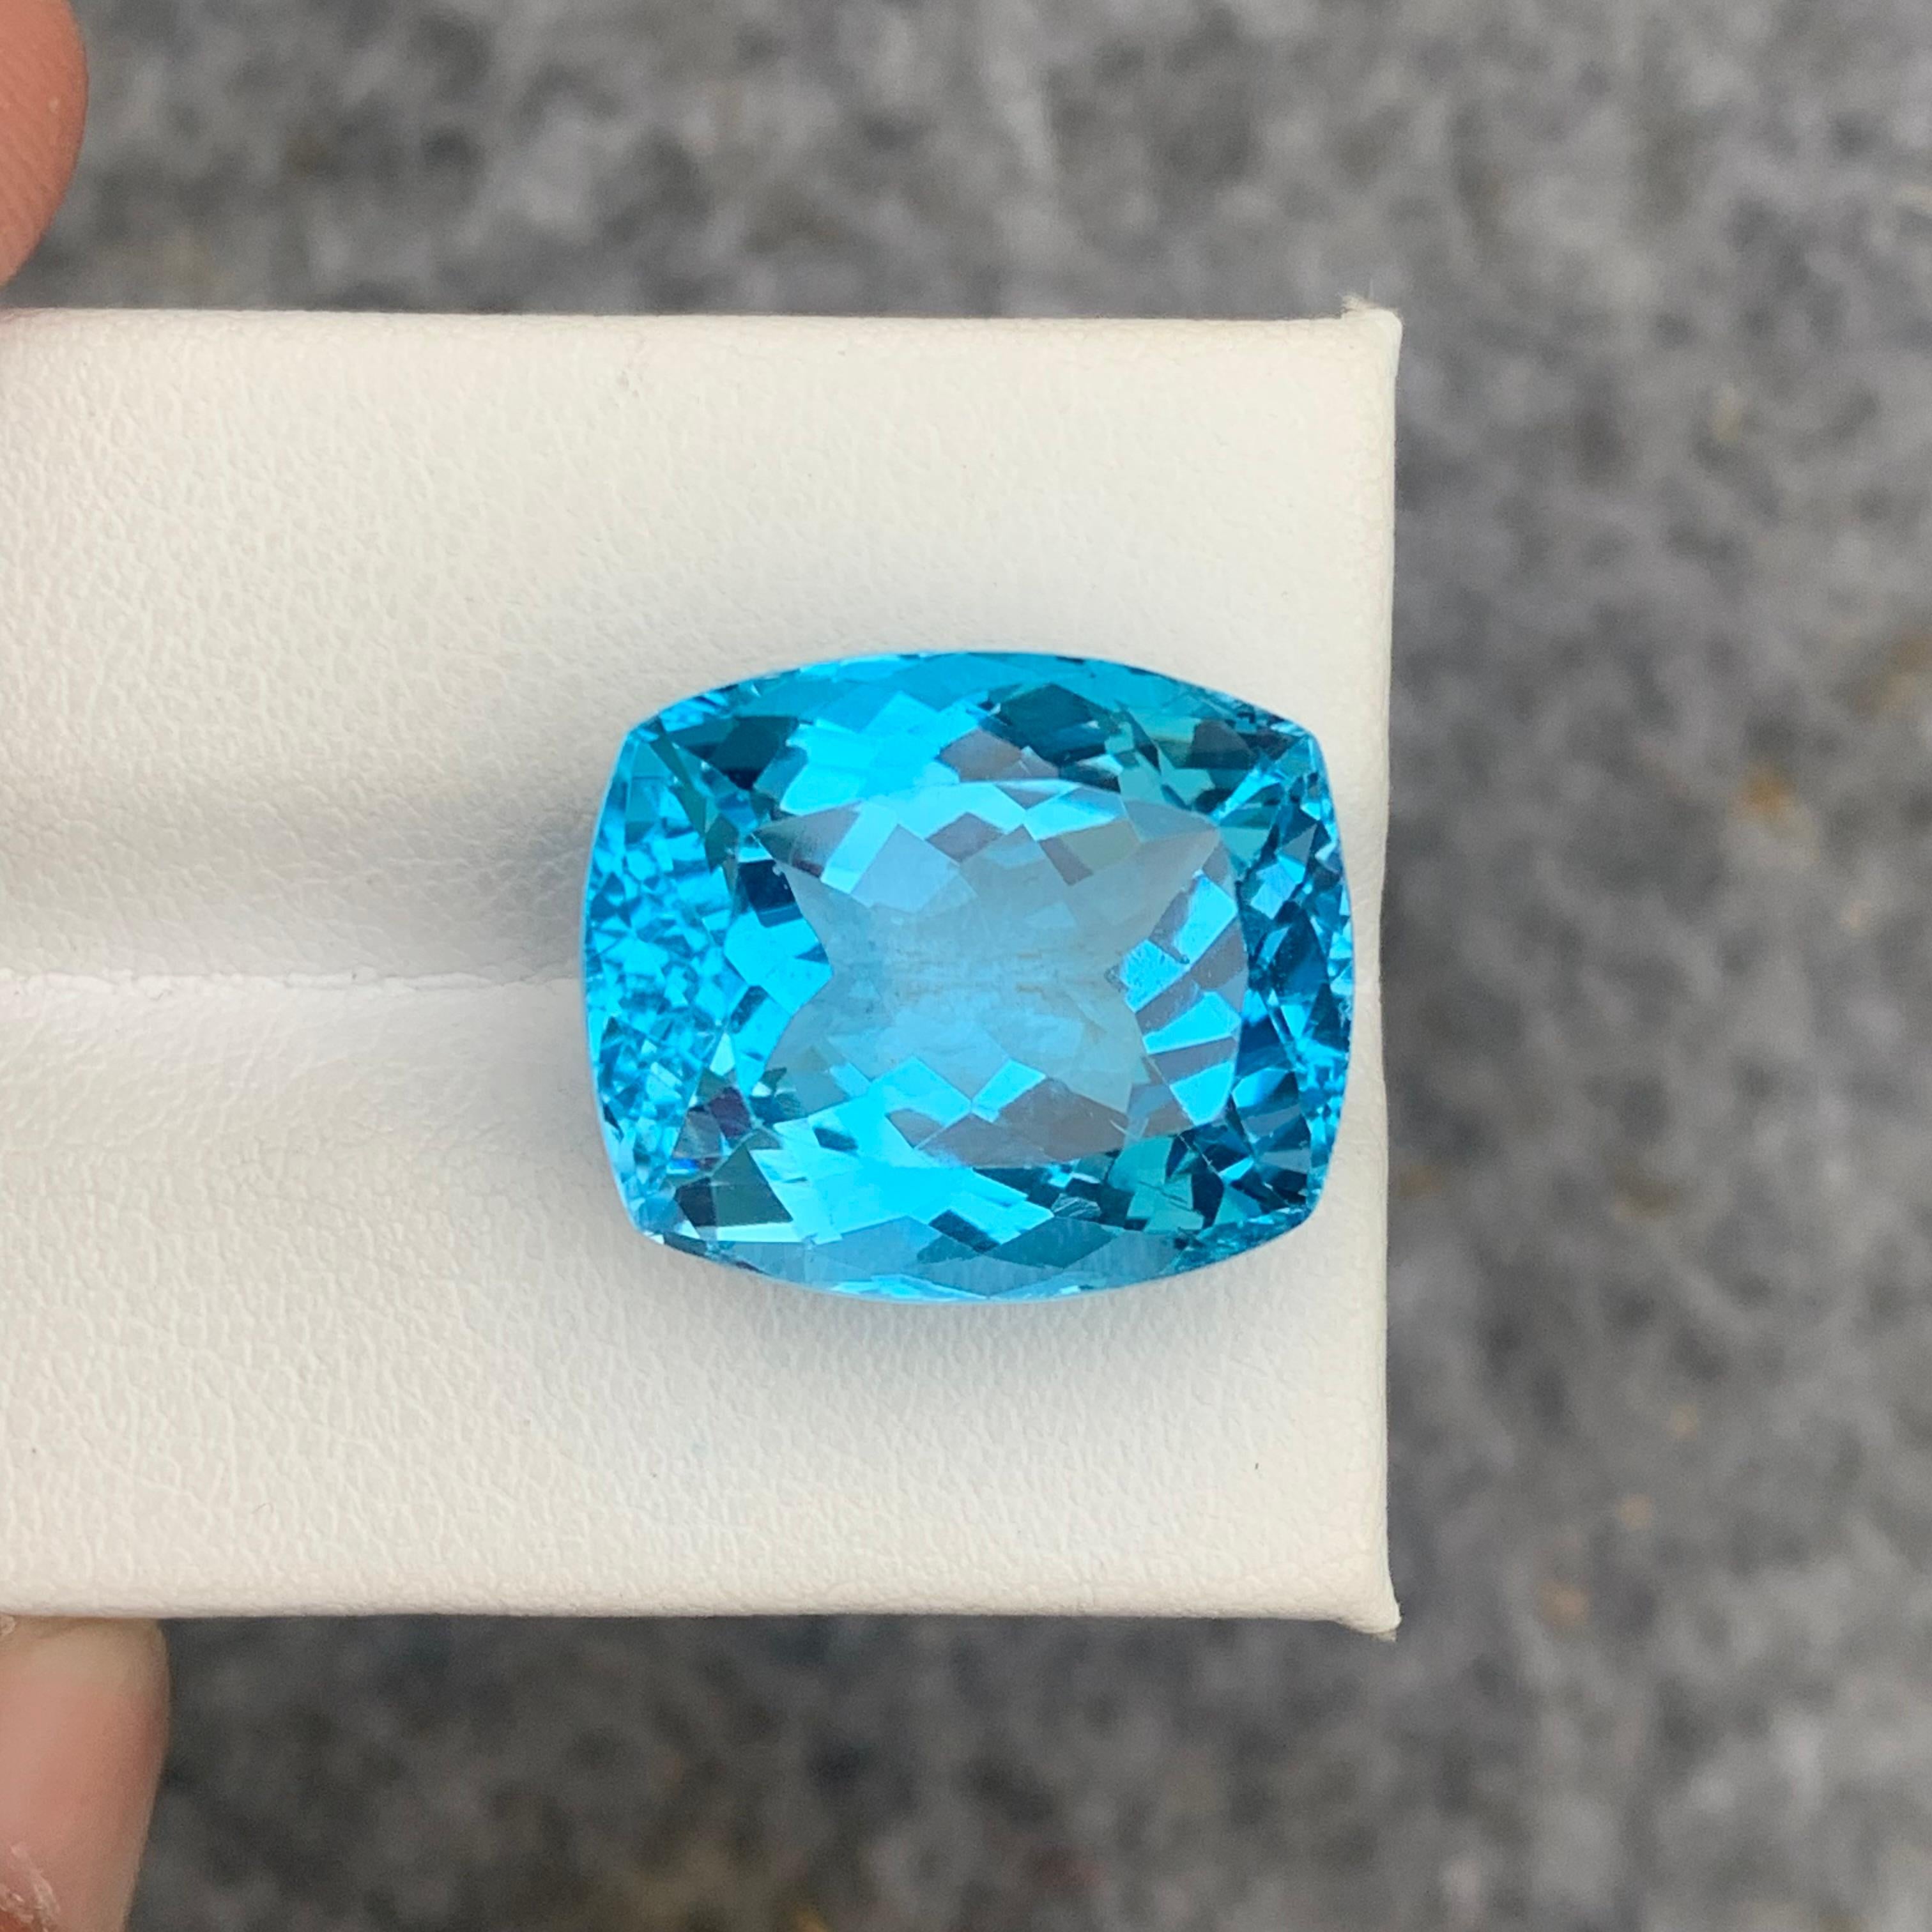 Gorgeous 31.10 Carat Loose Blue Topaz from Brazil Long Cushion Cut for Jewelry For Sale 6